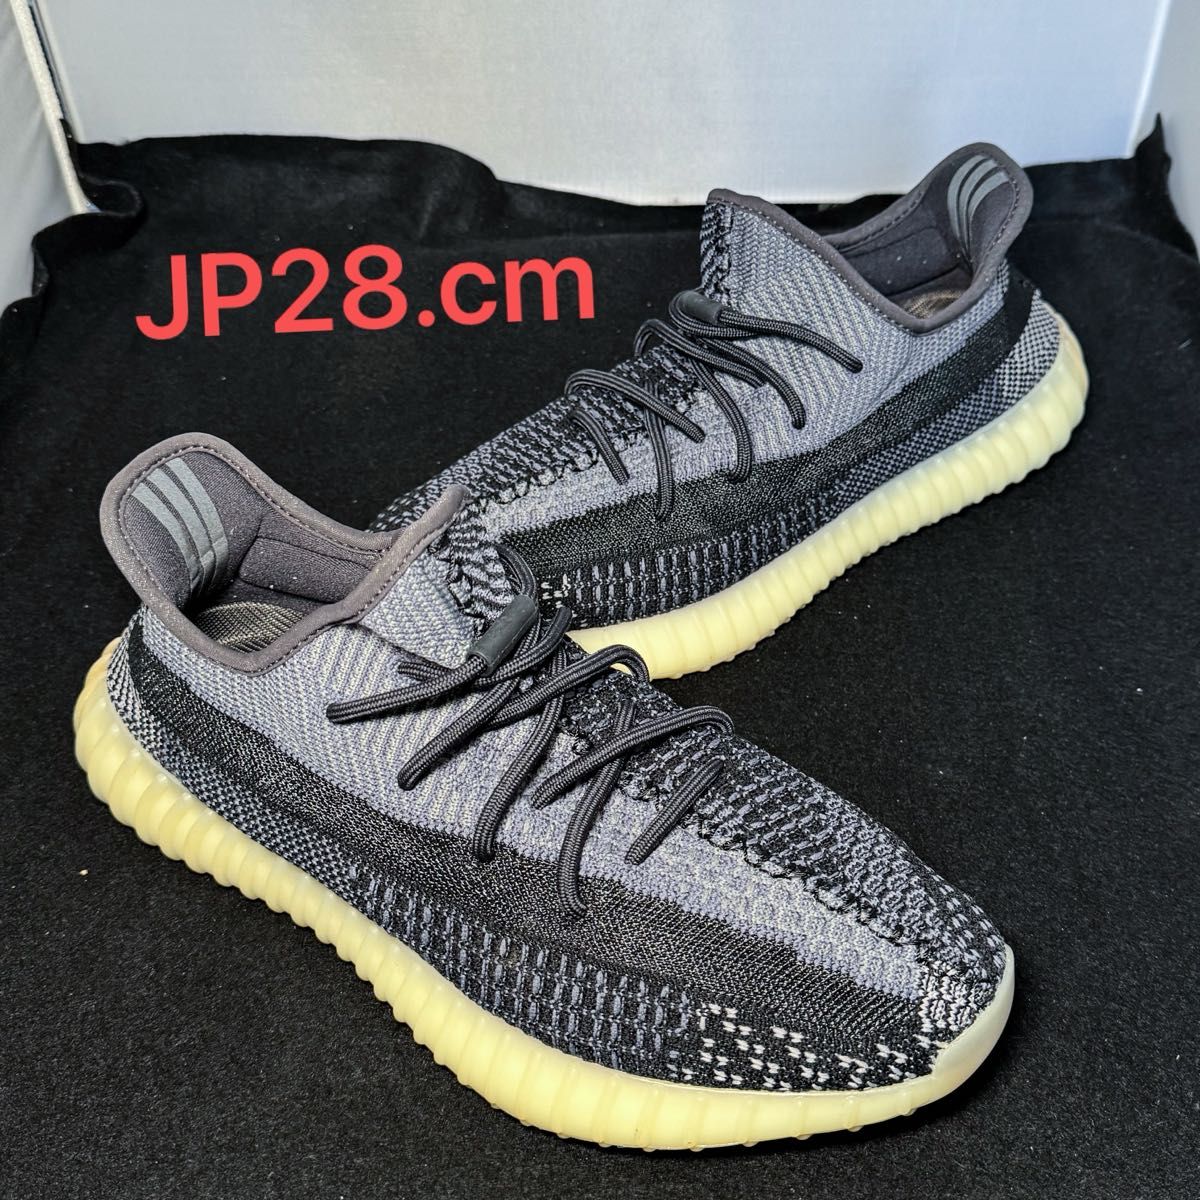 YEEZY BOOST 350 V2 "CARBON"